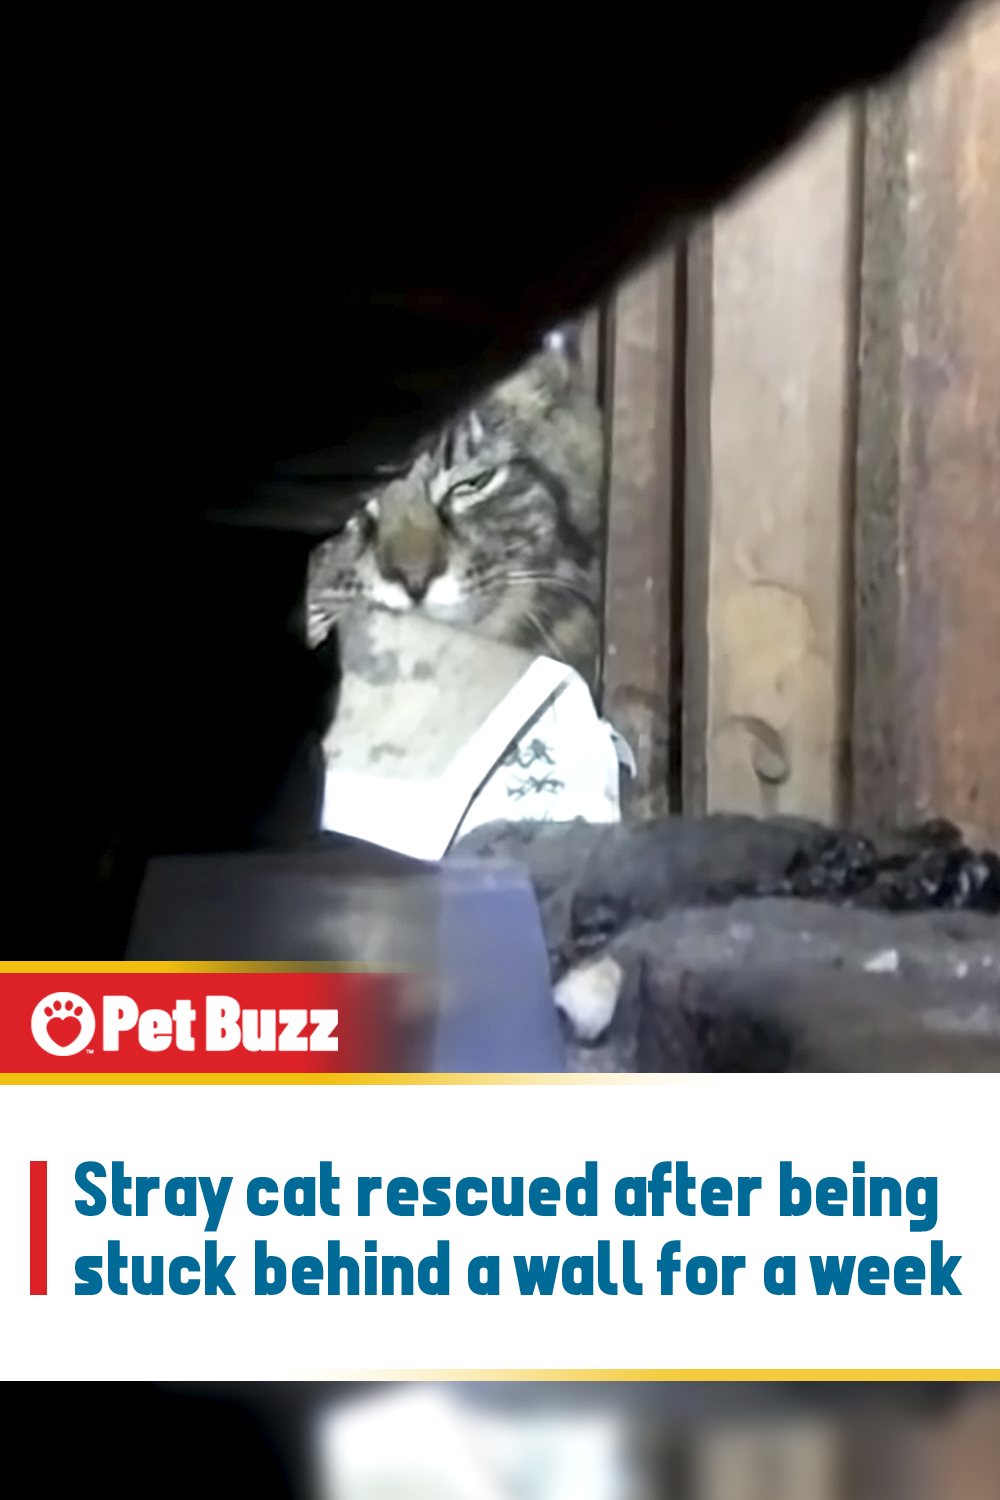 Stray cat rescued after being stuck behind a wall for a week